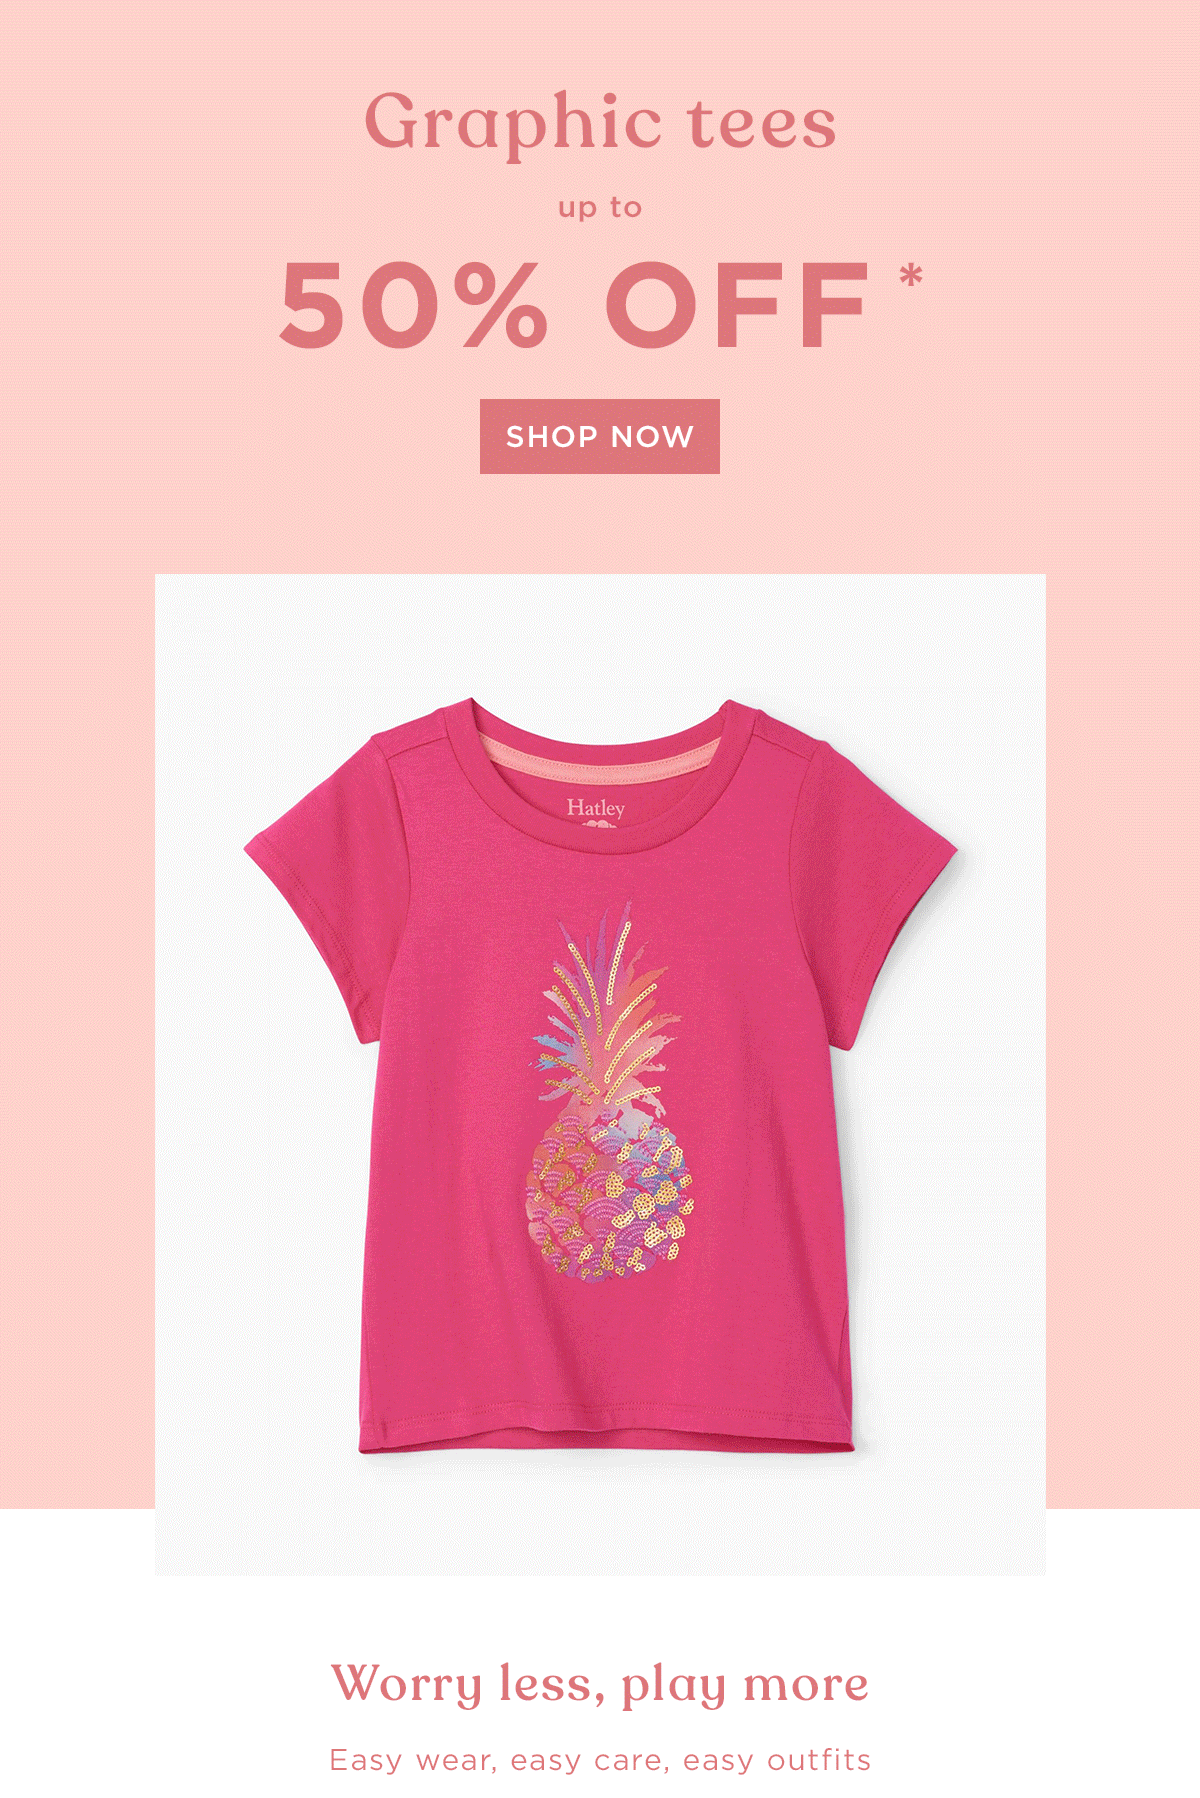 Graphic tees up to 50% off!